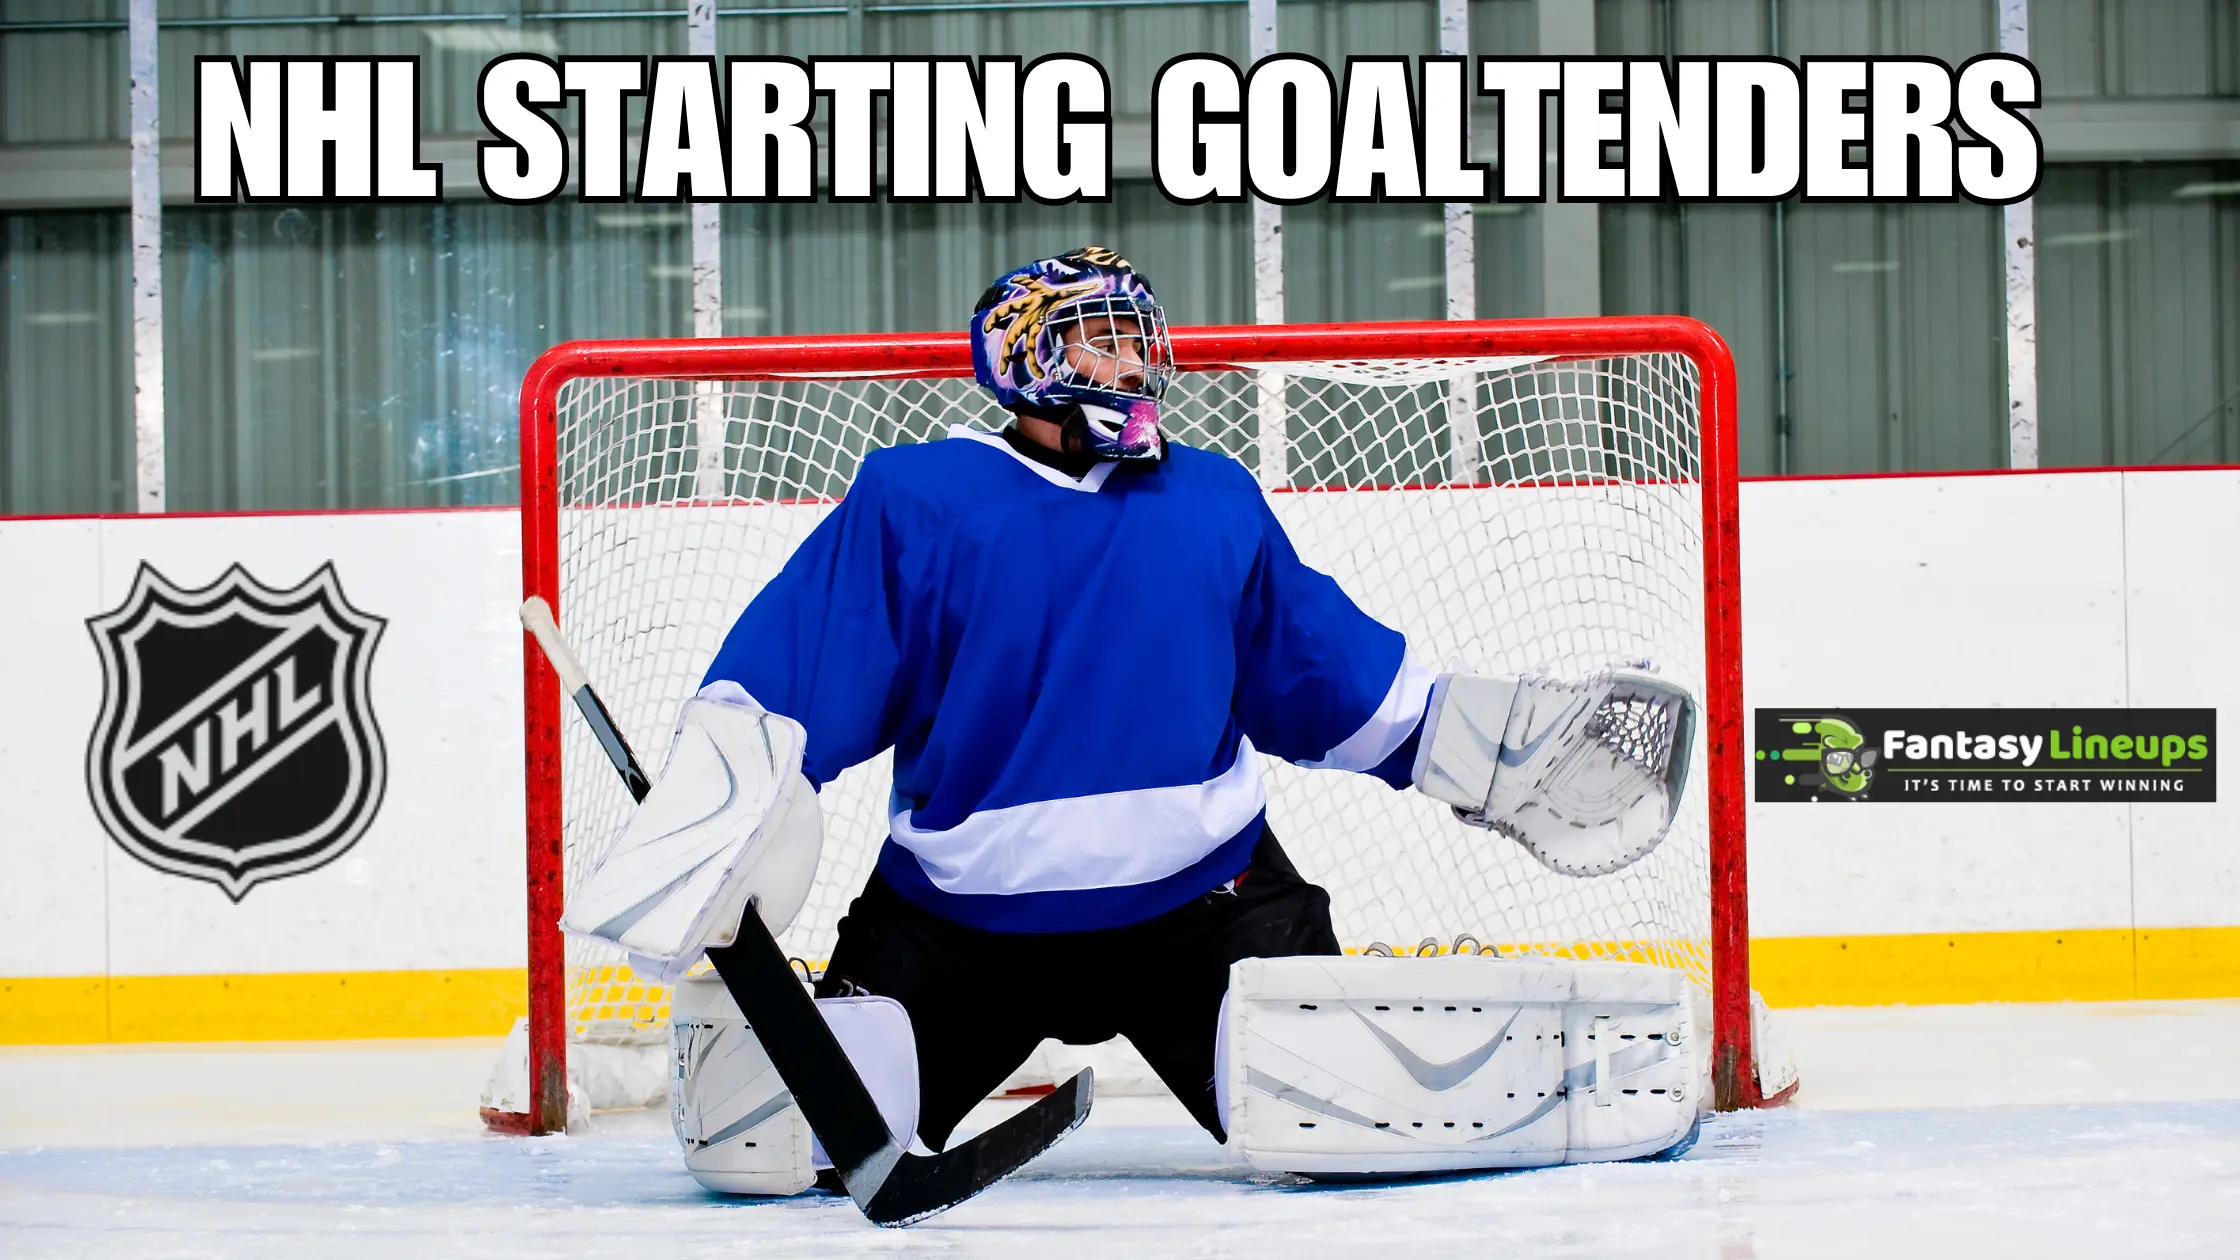 Understanding the Game: A Closer Look at Starting Goaltenders in the NHL